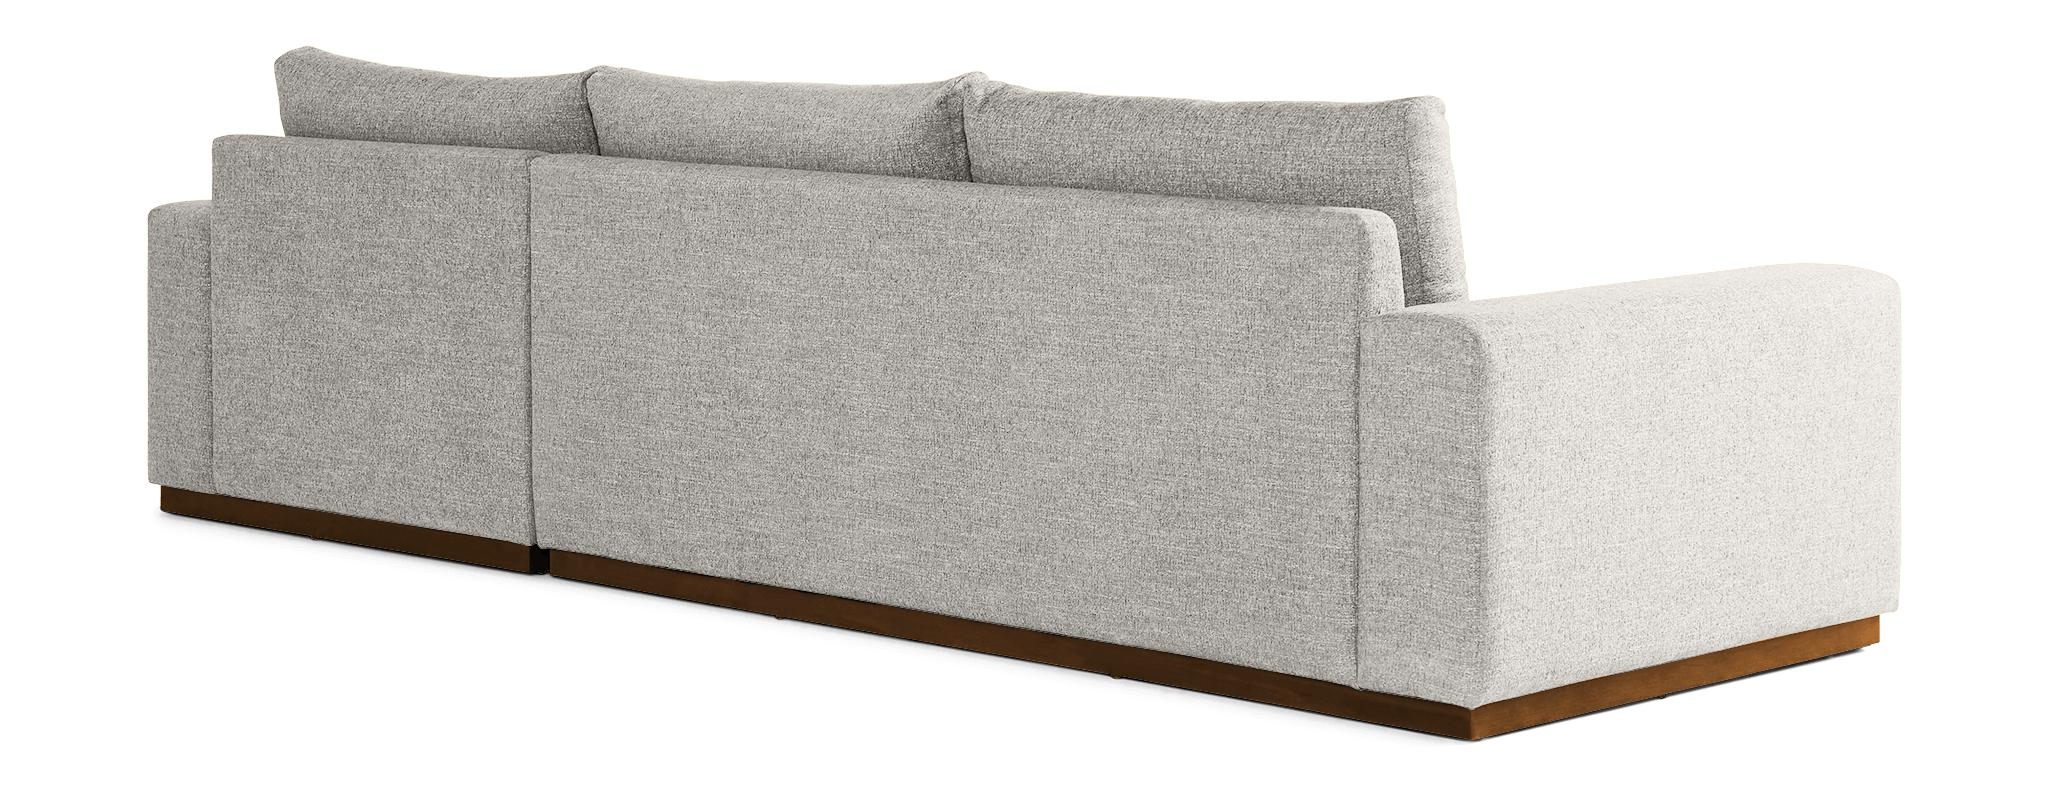 White Holt Mid Century Modern Sectional with Storage - Tussah Snow - Mocha - Right - Image 4